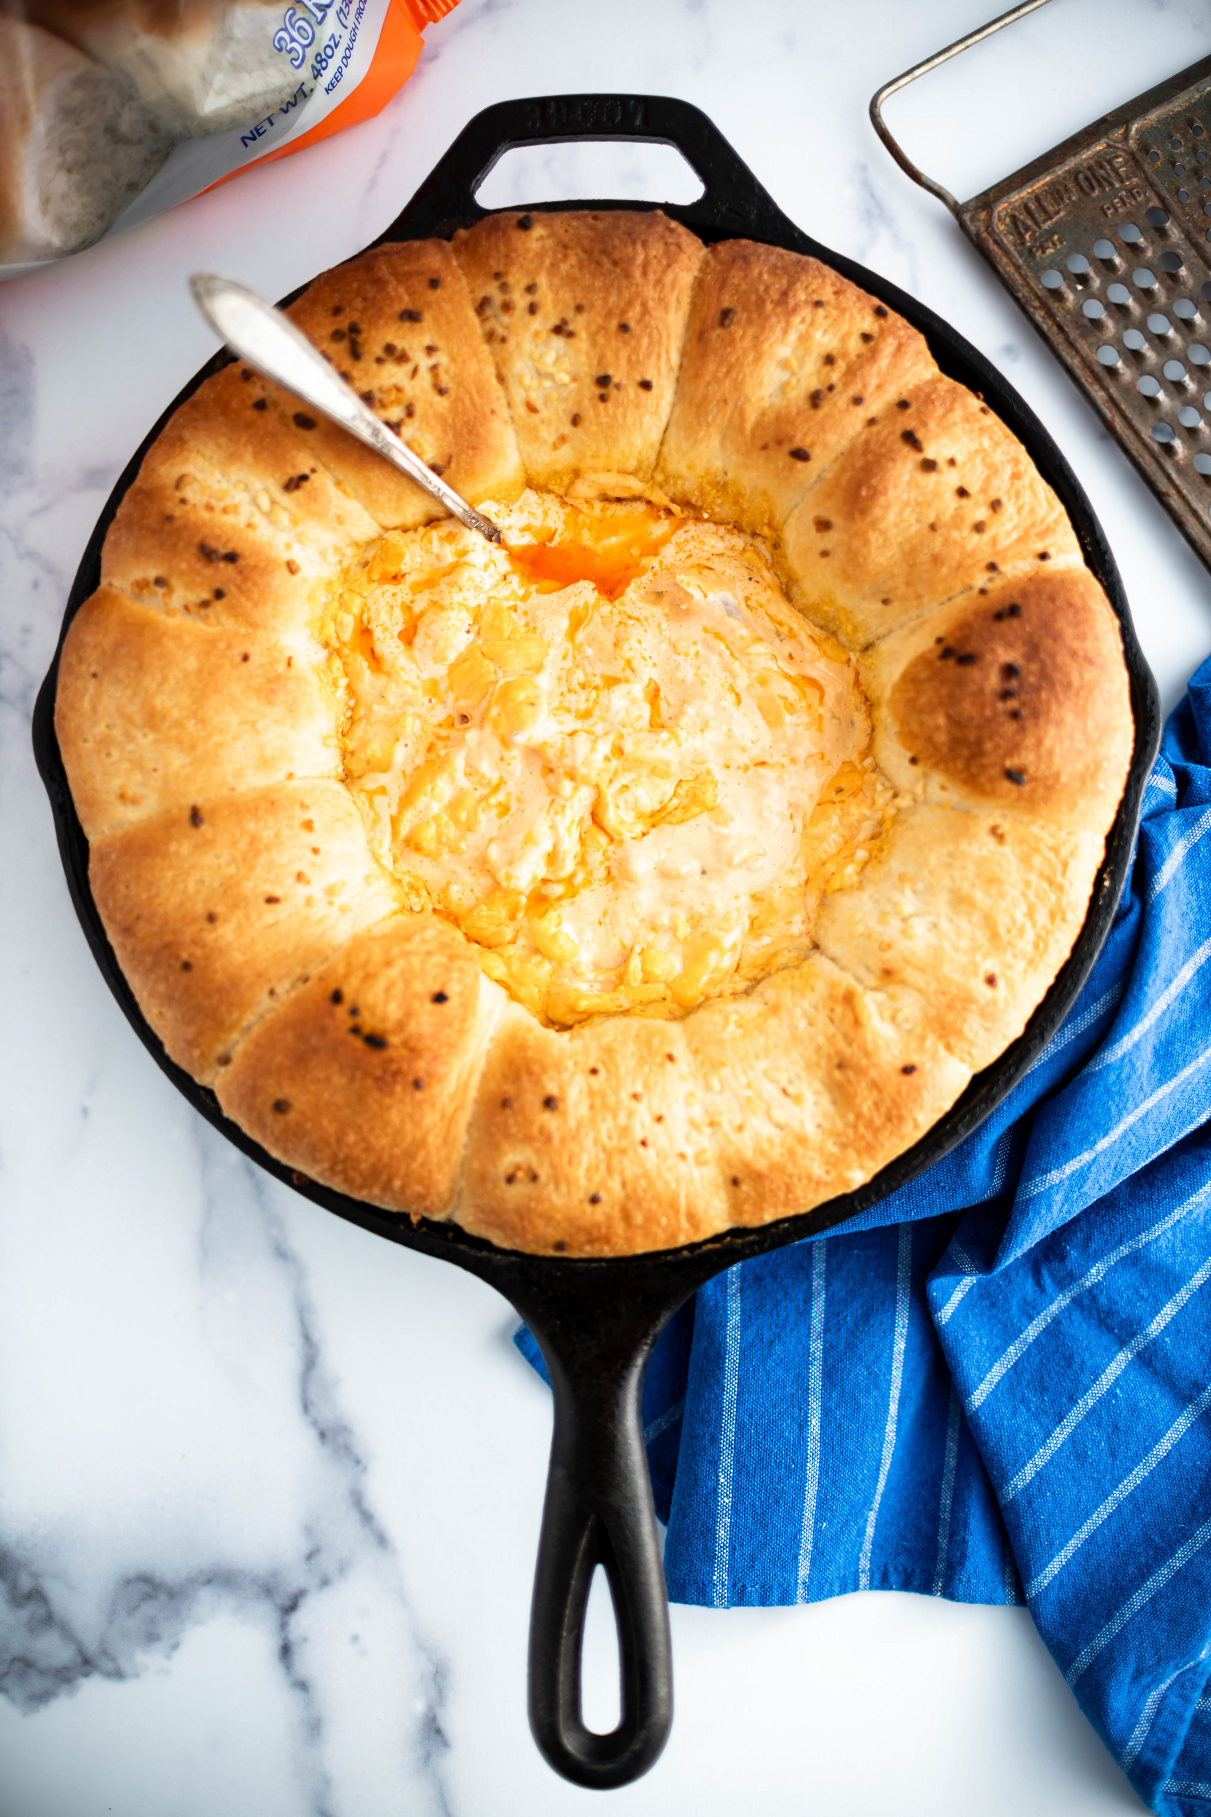 Cast iron skillet filled with Rhodes rolls and buffalo chicken dip in the middle.